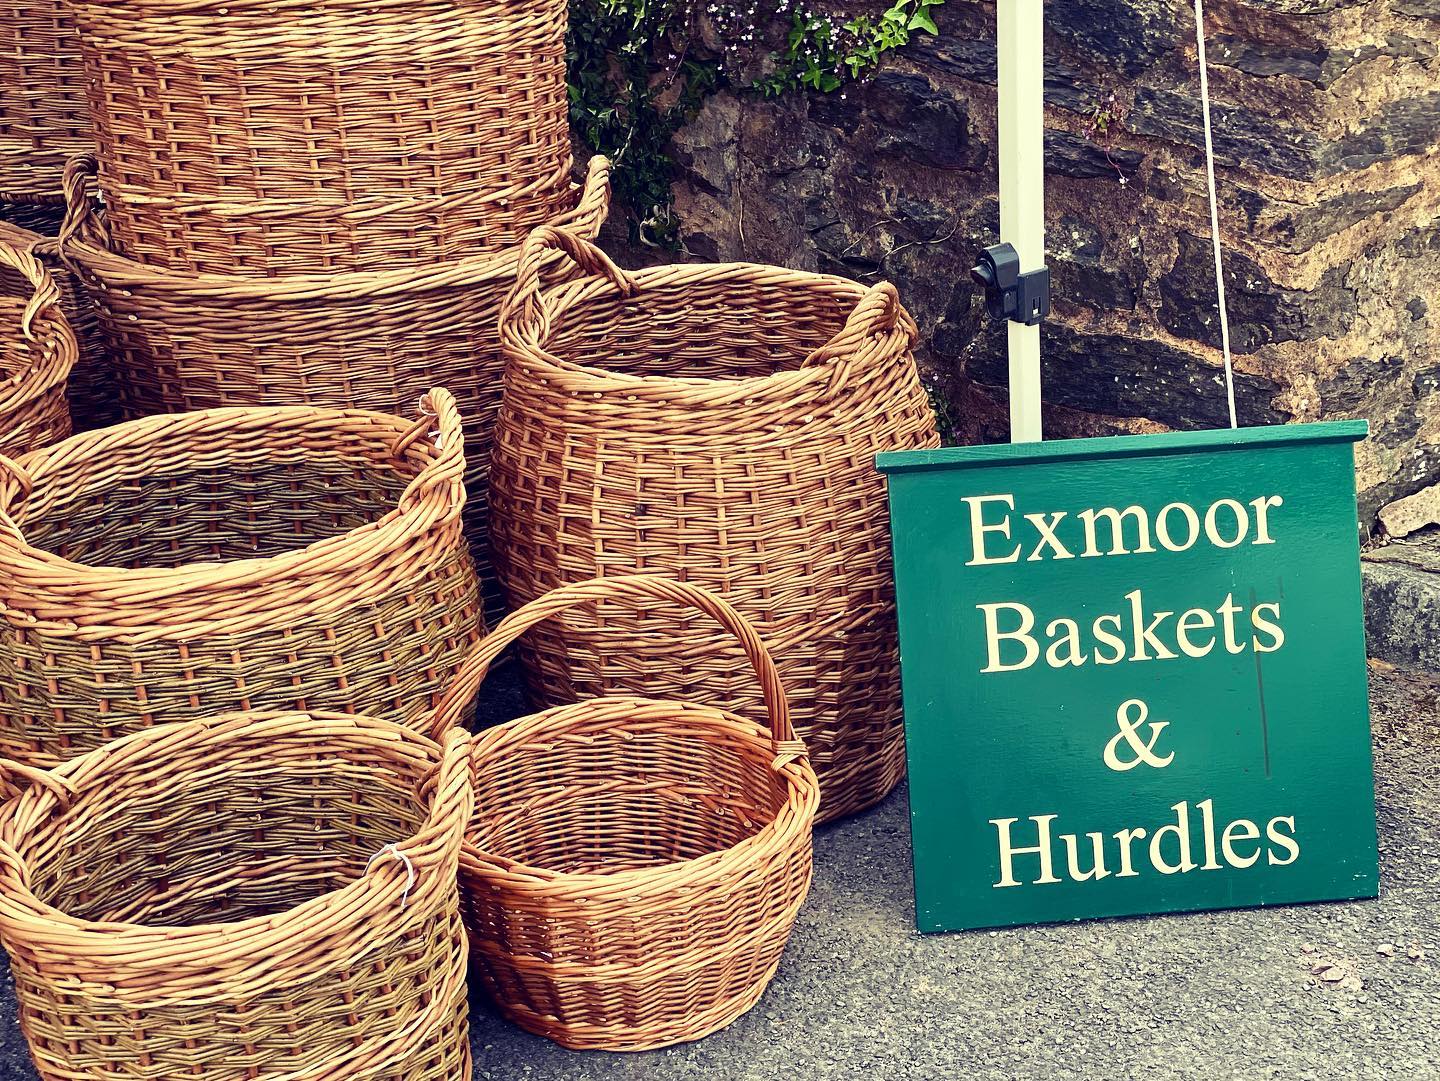 A selection of wicker baskets at a market stand and a green sign with white writing reading 'Exmoor baskets & Hurdles"